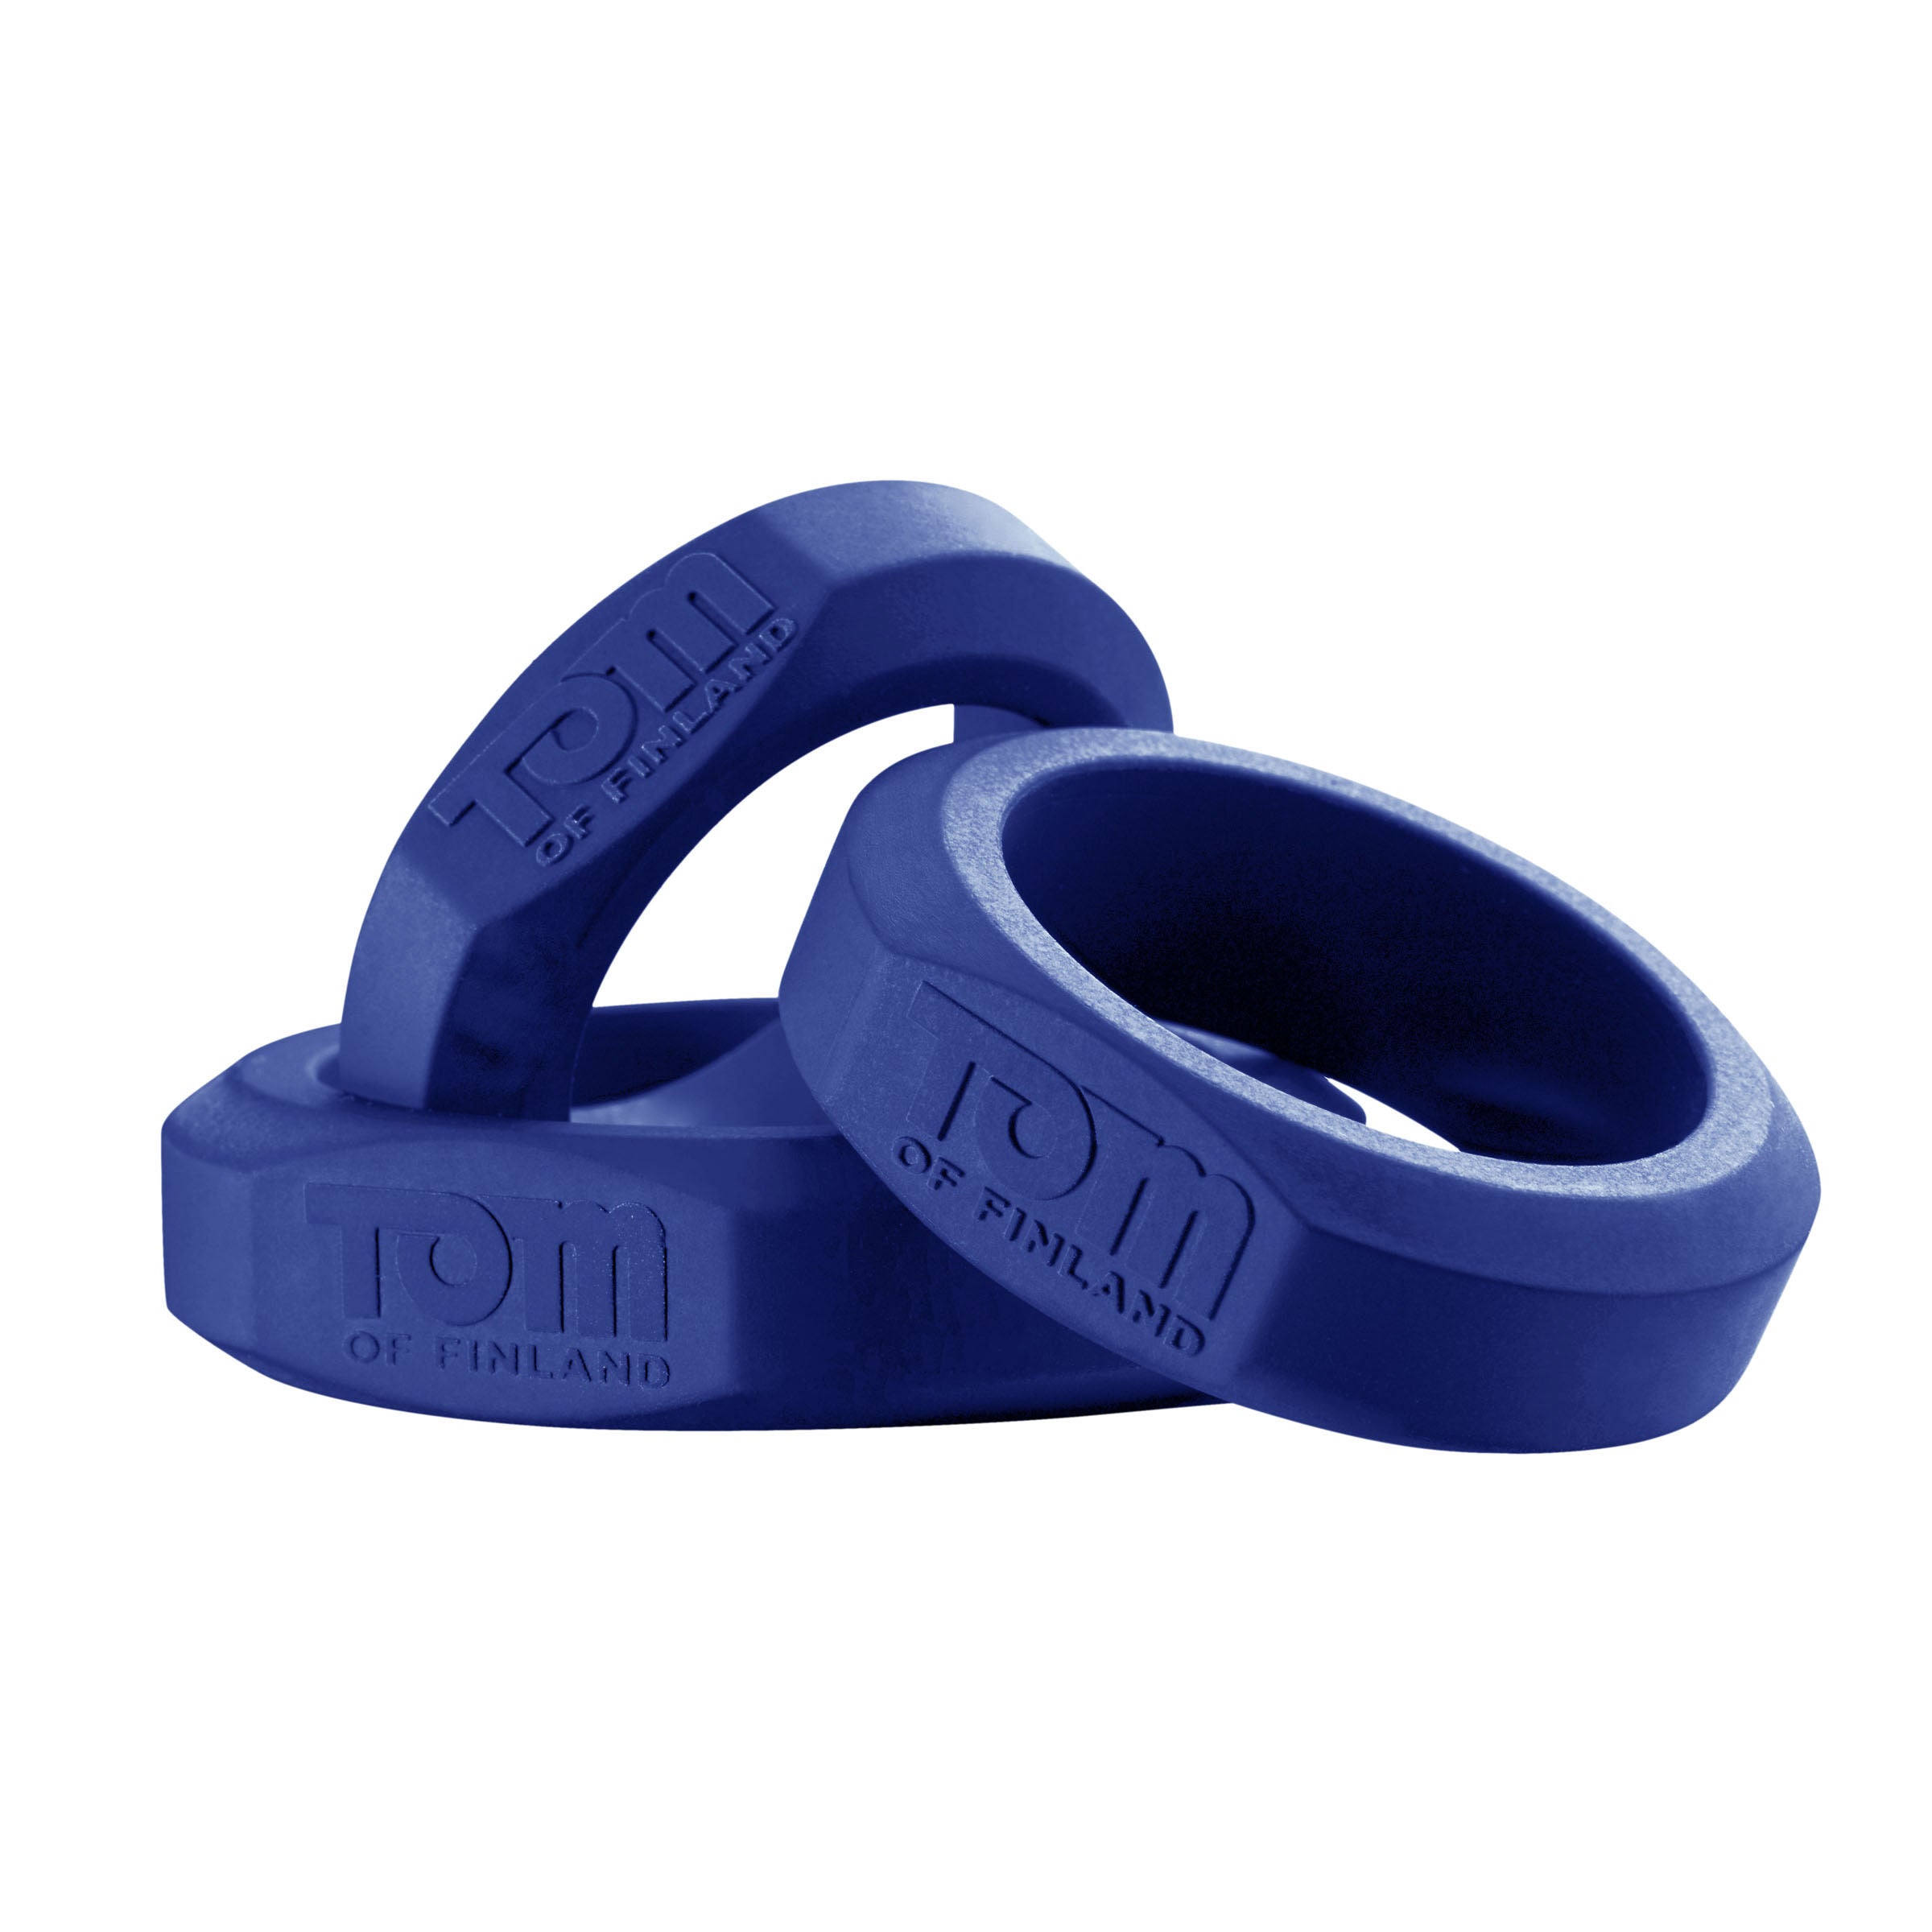 Tom of Finland 3 Piece Silicone Cock Ring Set - Blue